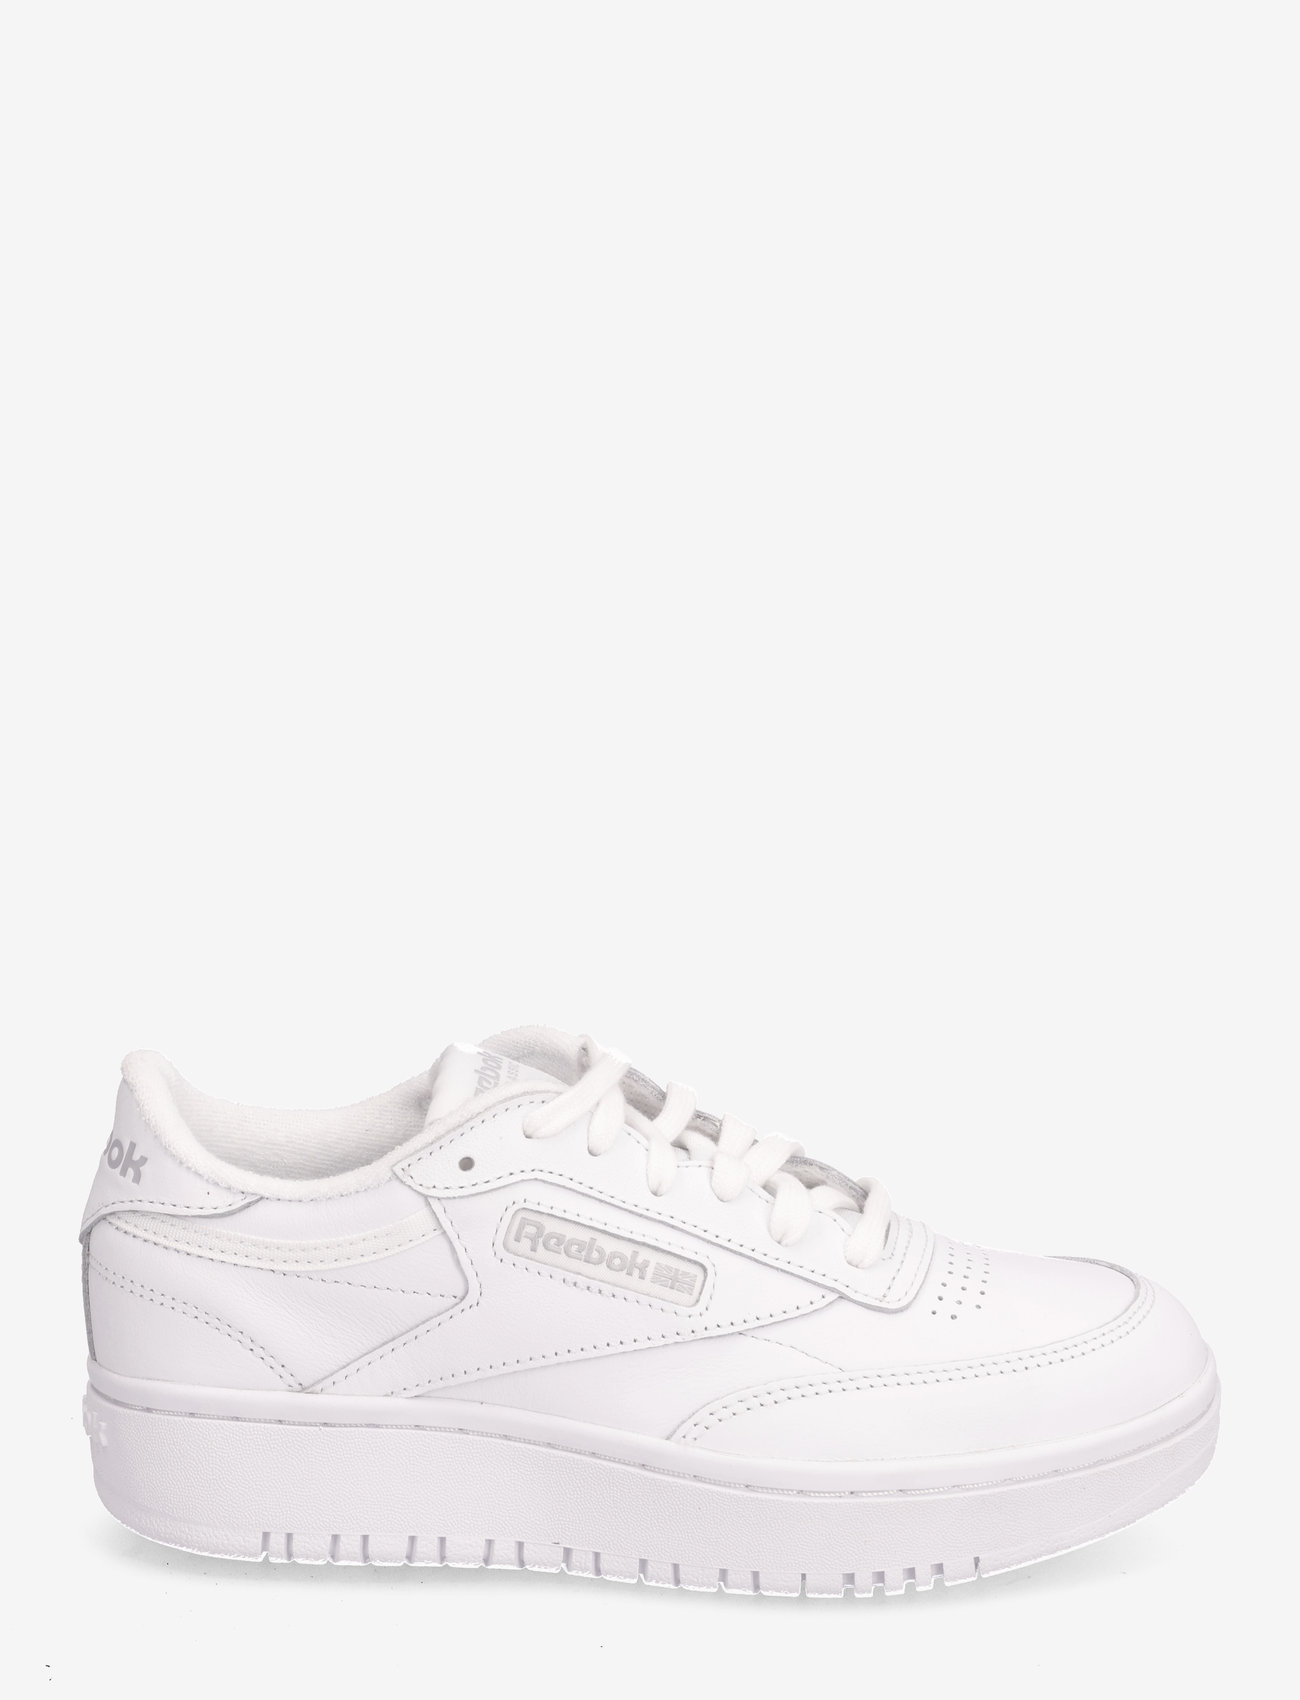 Reebok Classics - CLUB C DOUBLE - low top sneakers - ftwwht/ftwwht/cdgry2 - 1